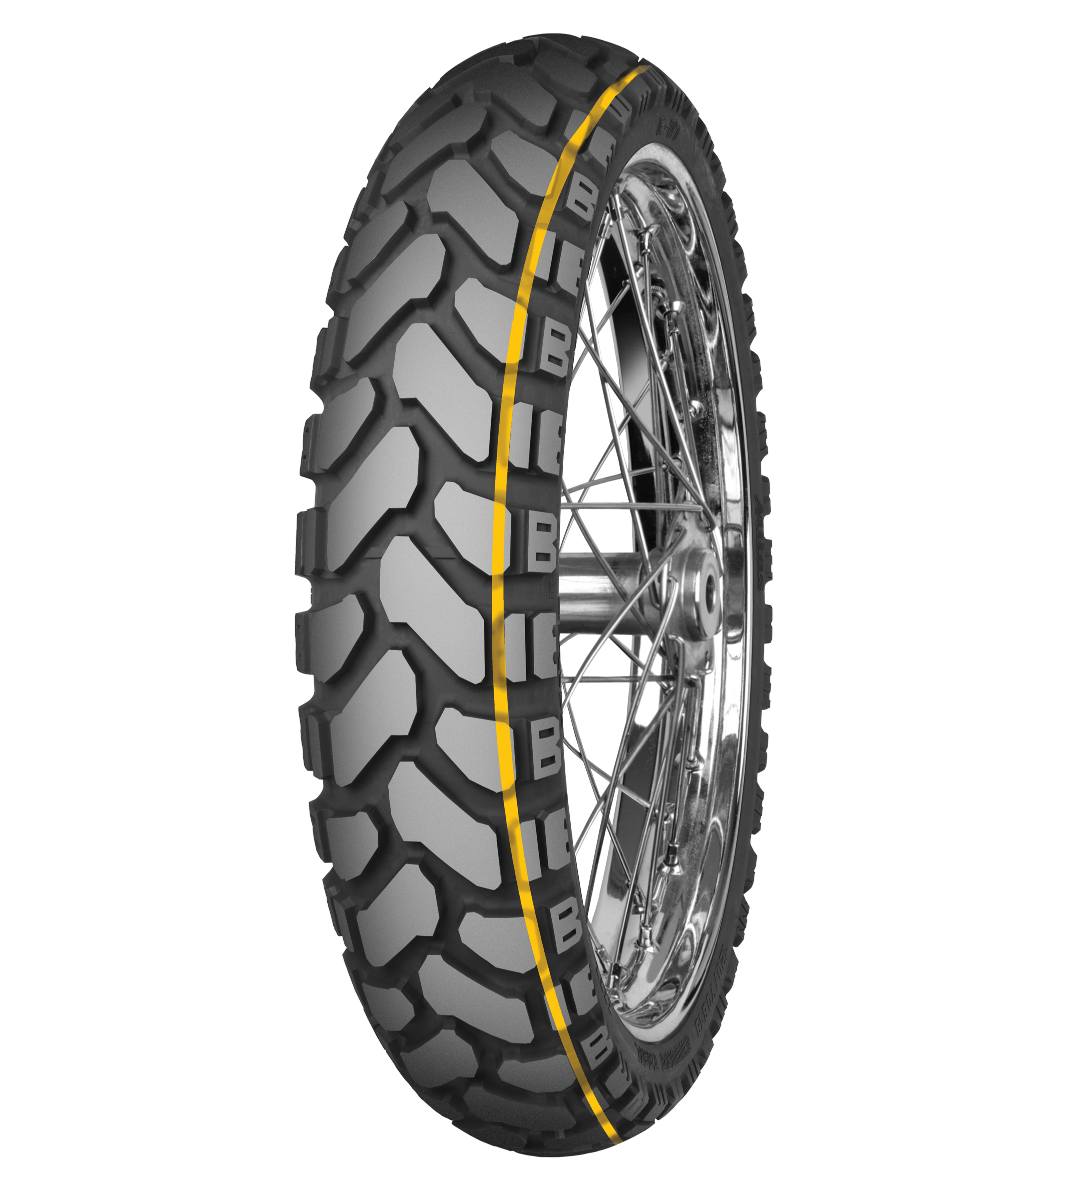 Mitas E-07+ ENDURO TRAIL 120/70B19 Trail ON Trail DAKAR 60T Yellow Tubeless Front Tire, 224142, 120/70B19, Adventure Touring, E Series, E-07+ Enduro Trail, Front, Trail, Trail ON, Tires - Imported and distributed in North &amp; South America by Lindeco Genuine Powersports - Premier Powersports Equipment and Accessories for Motorcycle Enthusiasts, Professional Riders and Dealers.